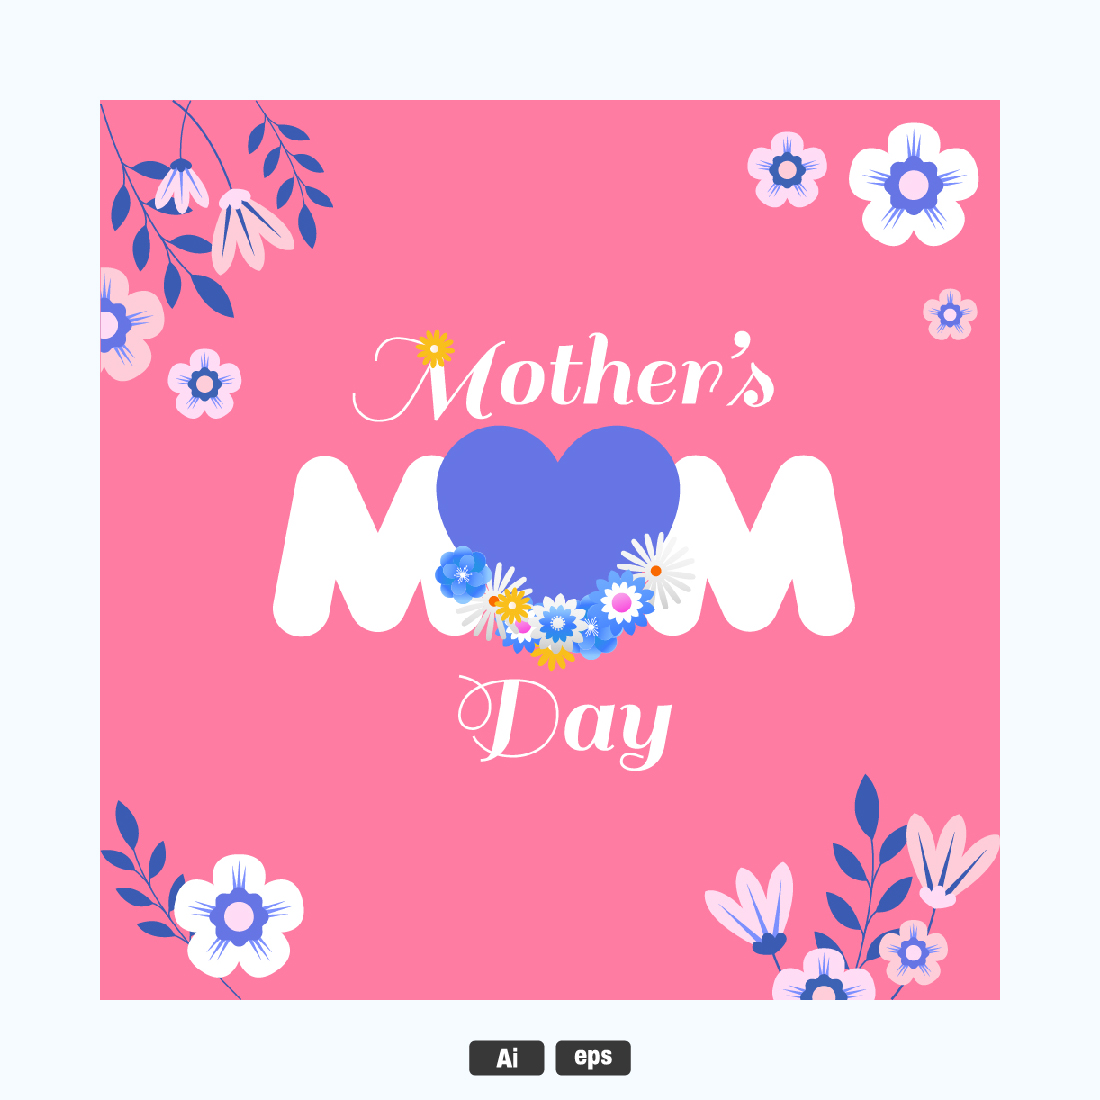 Mother's day Social media banner Vector banner and flying pink paper hearts Symbols of love on isolated white background cover image.